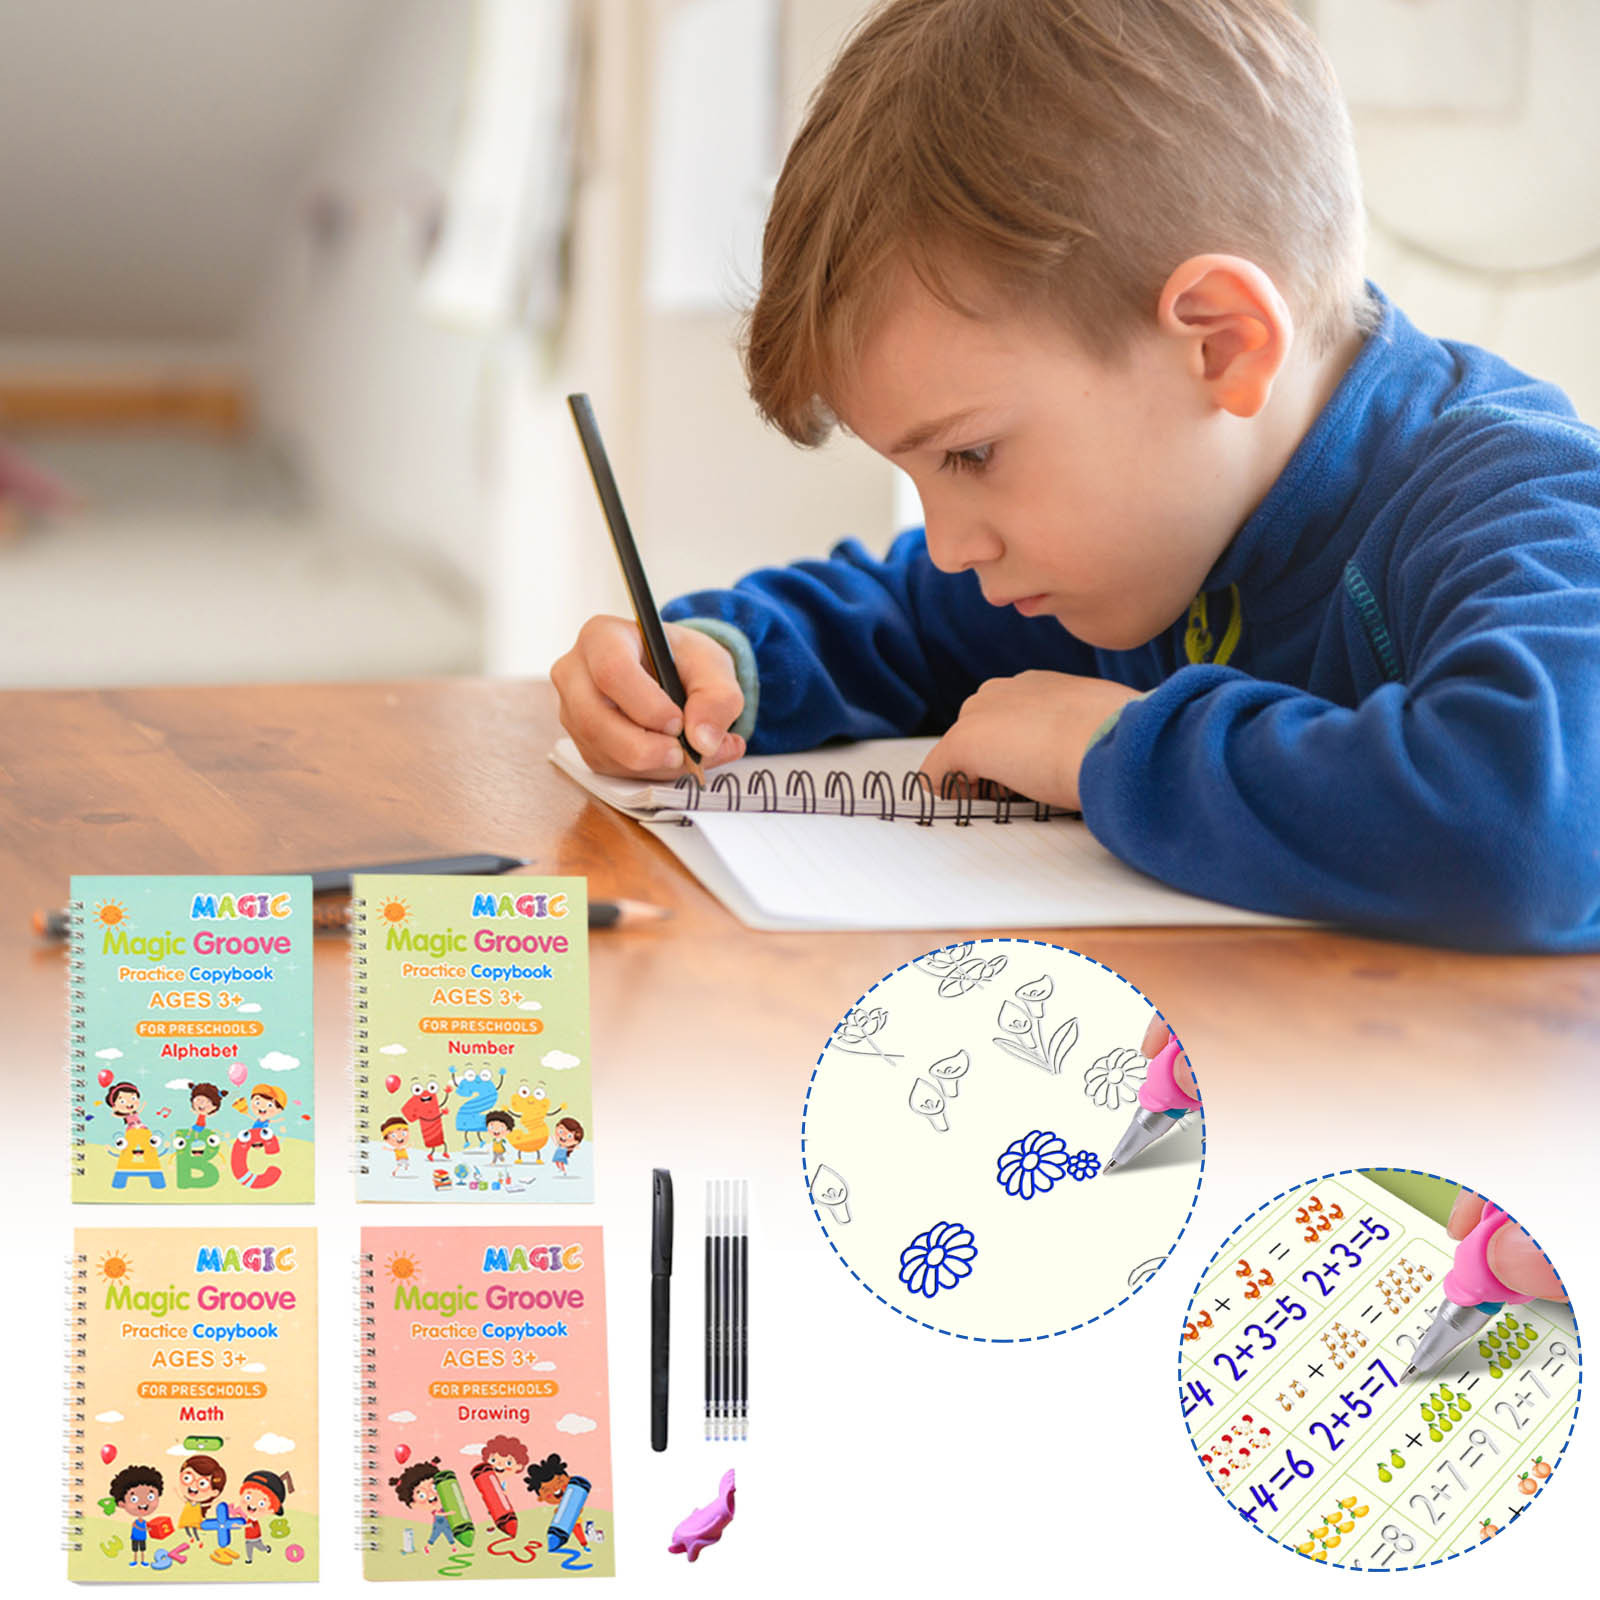 Lingouzi 4pc Children's Magic Copybooks,Handwriting Practice for Kids,Dry Erase Markers,Calligraphy Pens for Back to School,Reused Handwriting